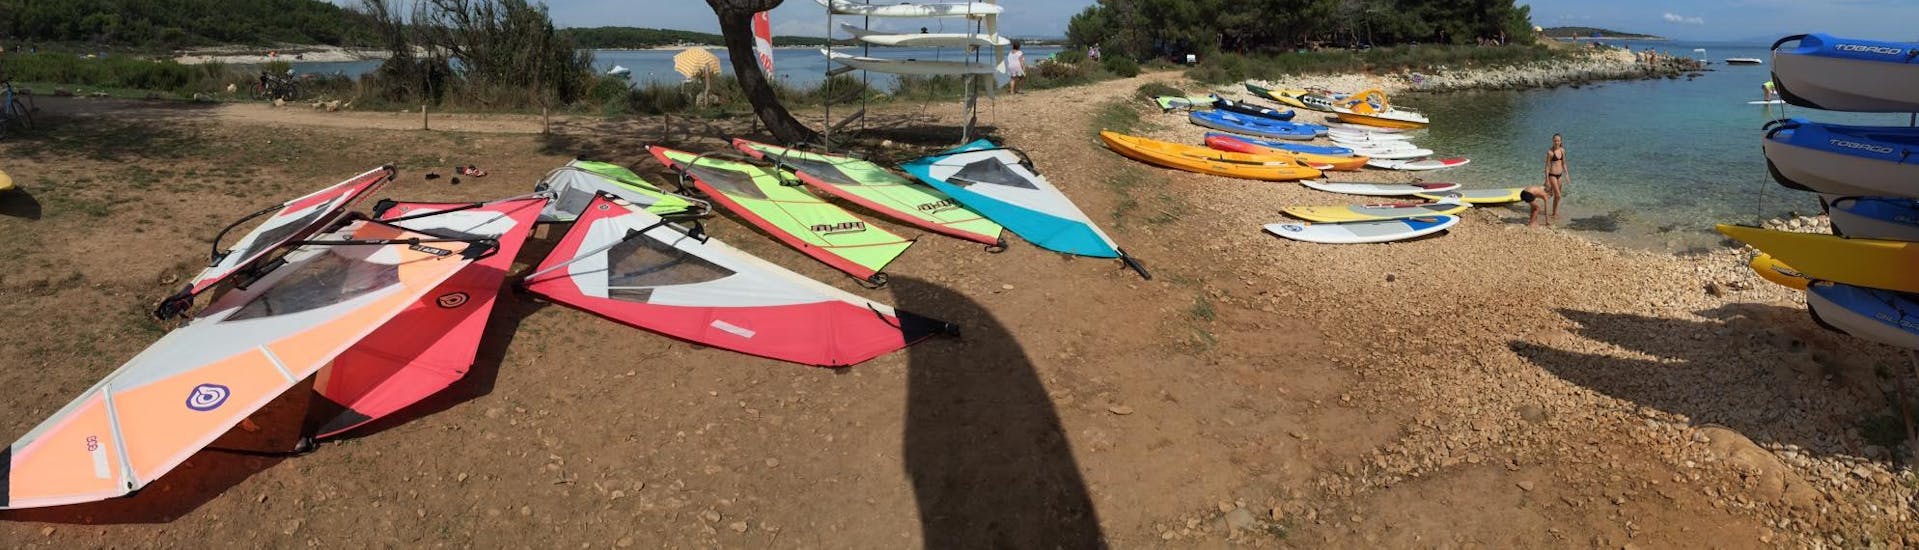 A group of boards from a Sit-On Sea Kayak Rental at Cape Kamenjak with Windsurf Station Premantura.